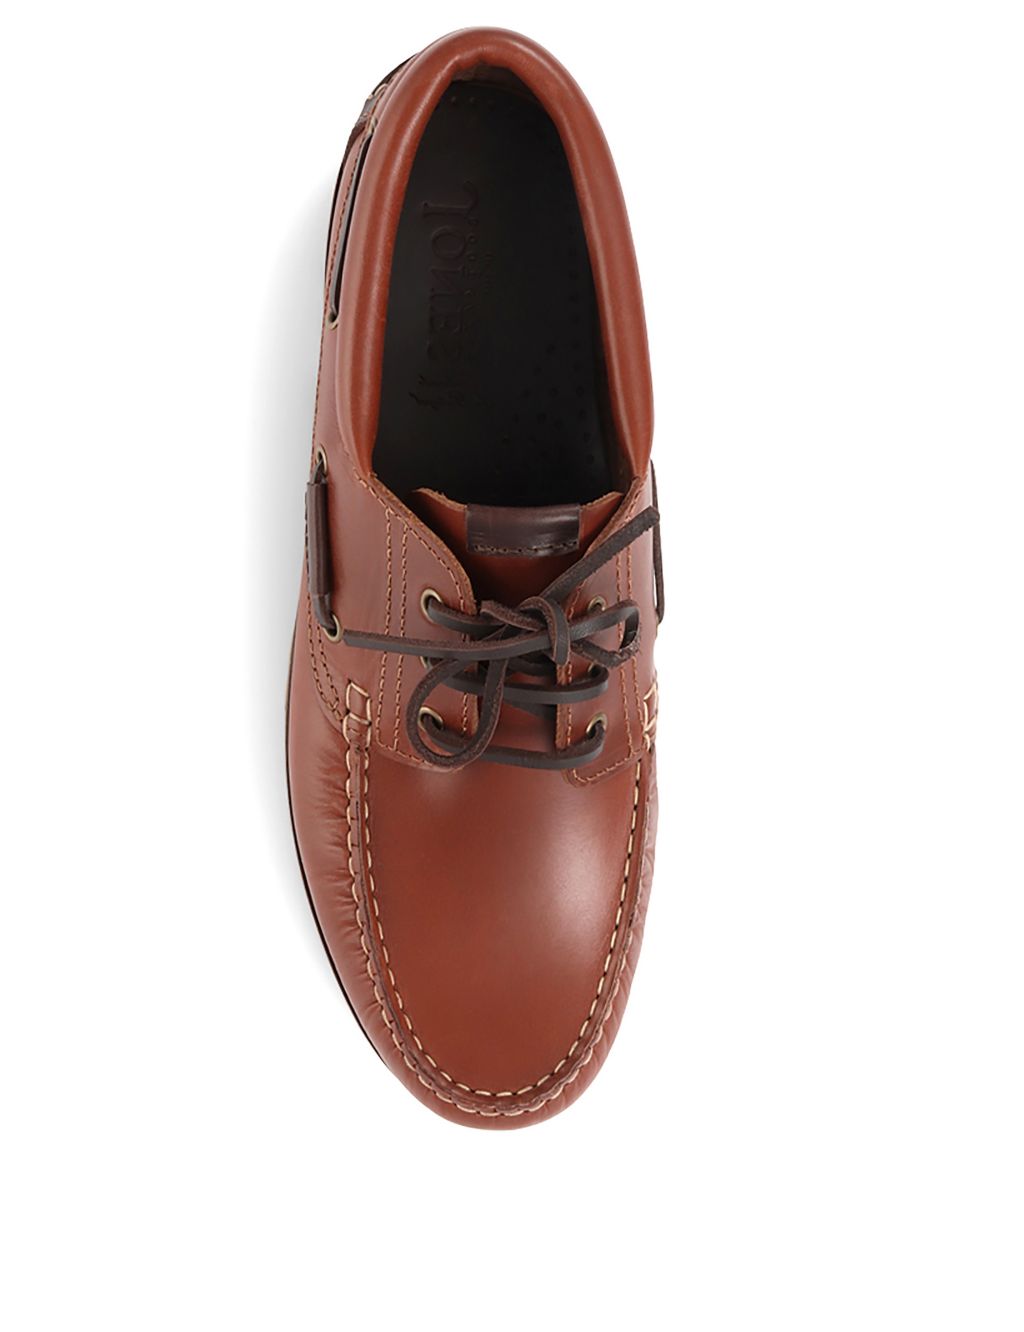 Leather Boat Shoes image 5